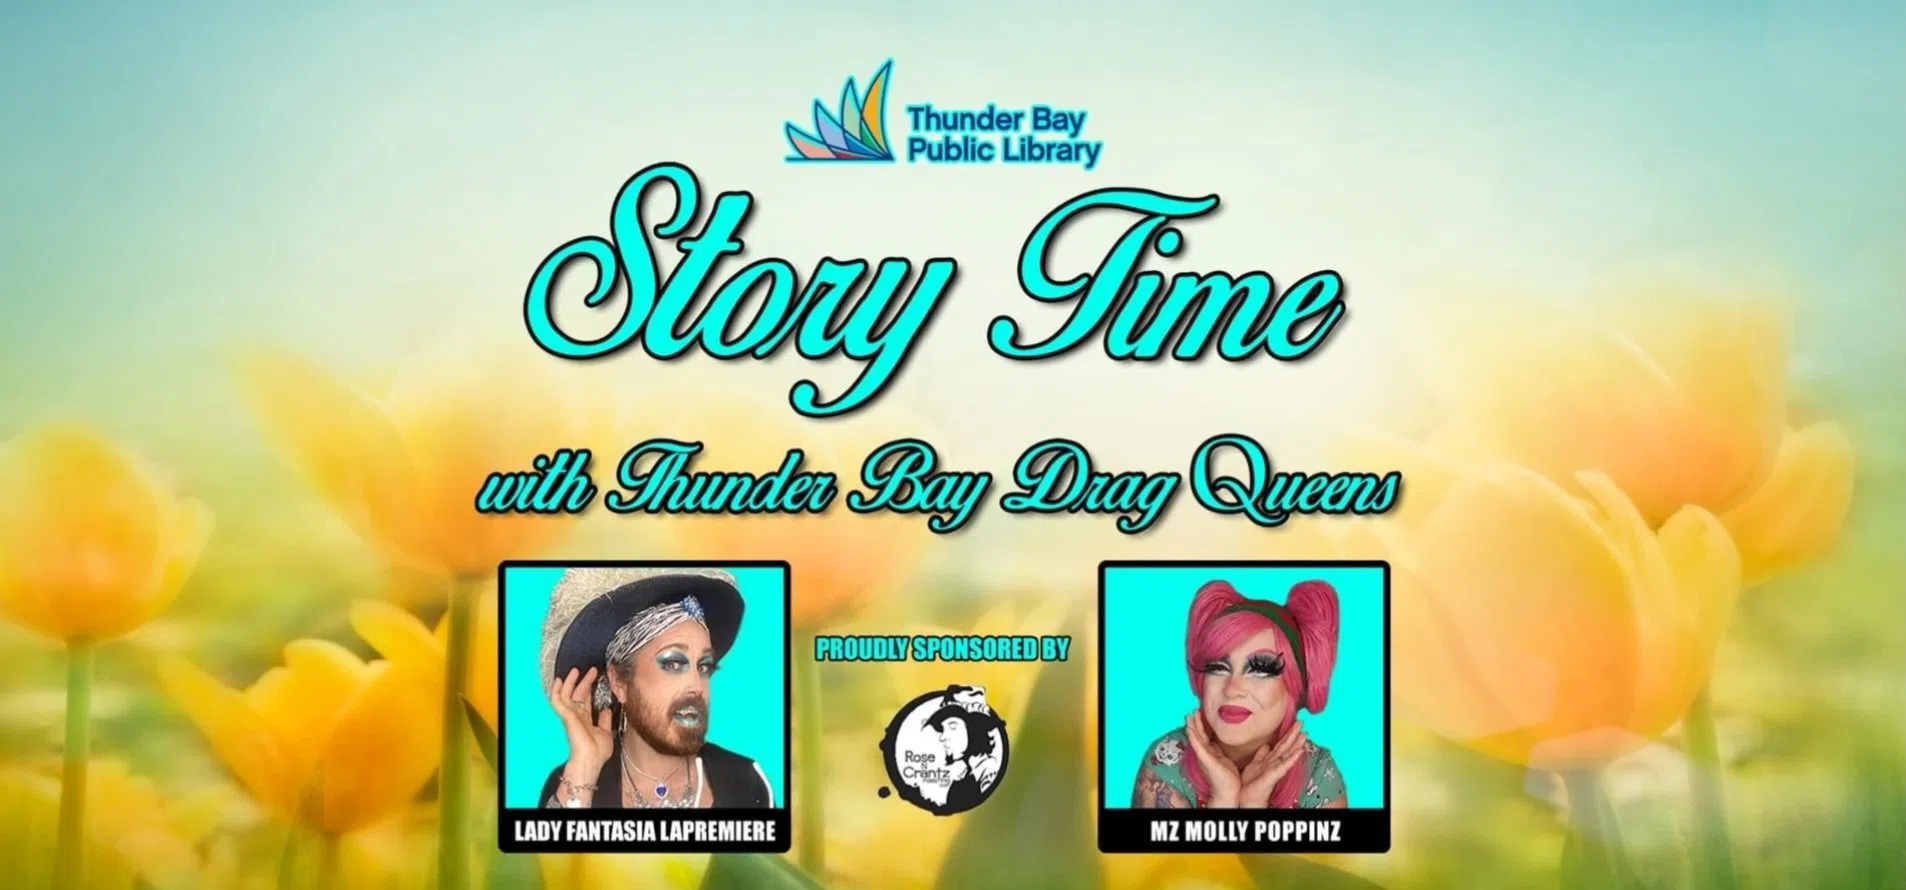 Drag story time bomb threat under investigation